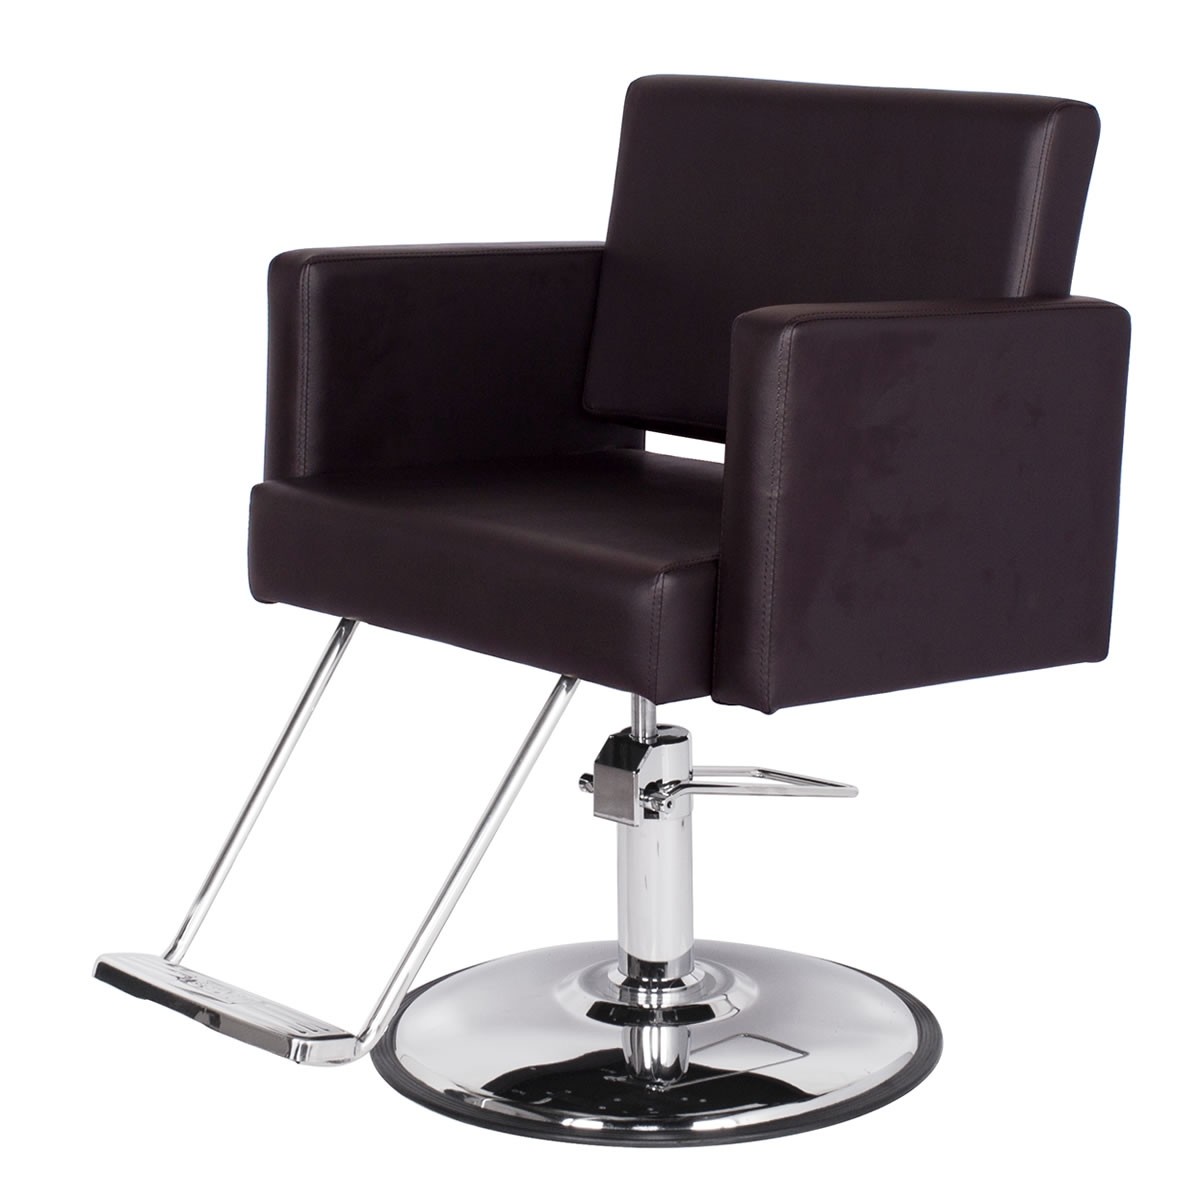 "GRAND CANON" Extra Large Salon Chair in Soft Chocolate ...